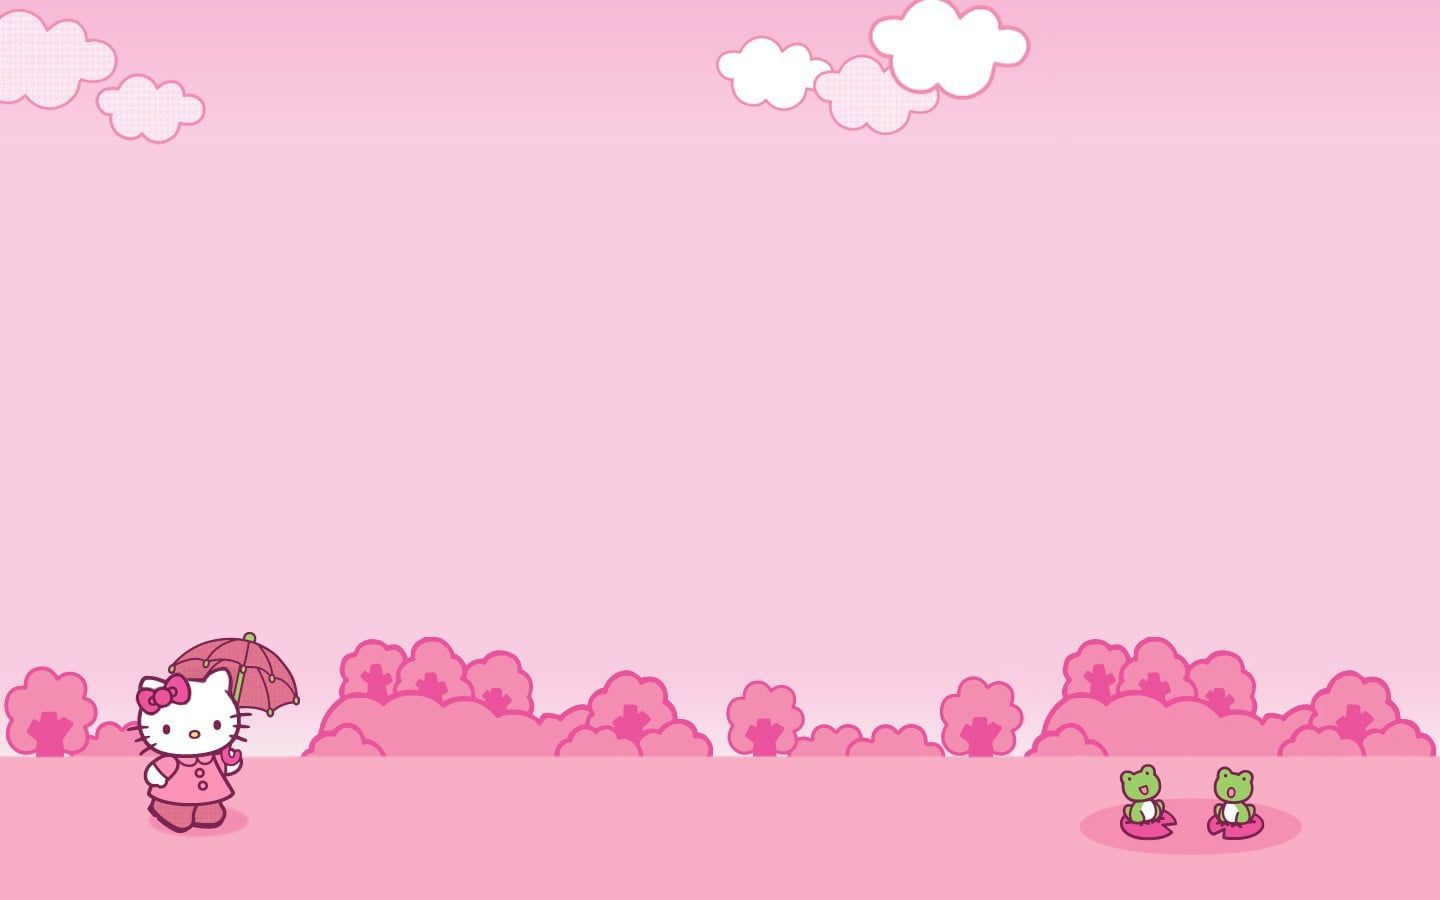 Top Sanrio Wallpaper Desktop Pink in 2023 Don t miss out 